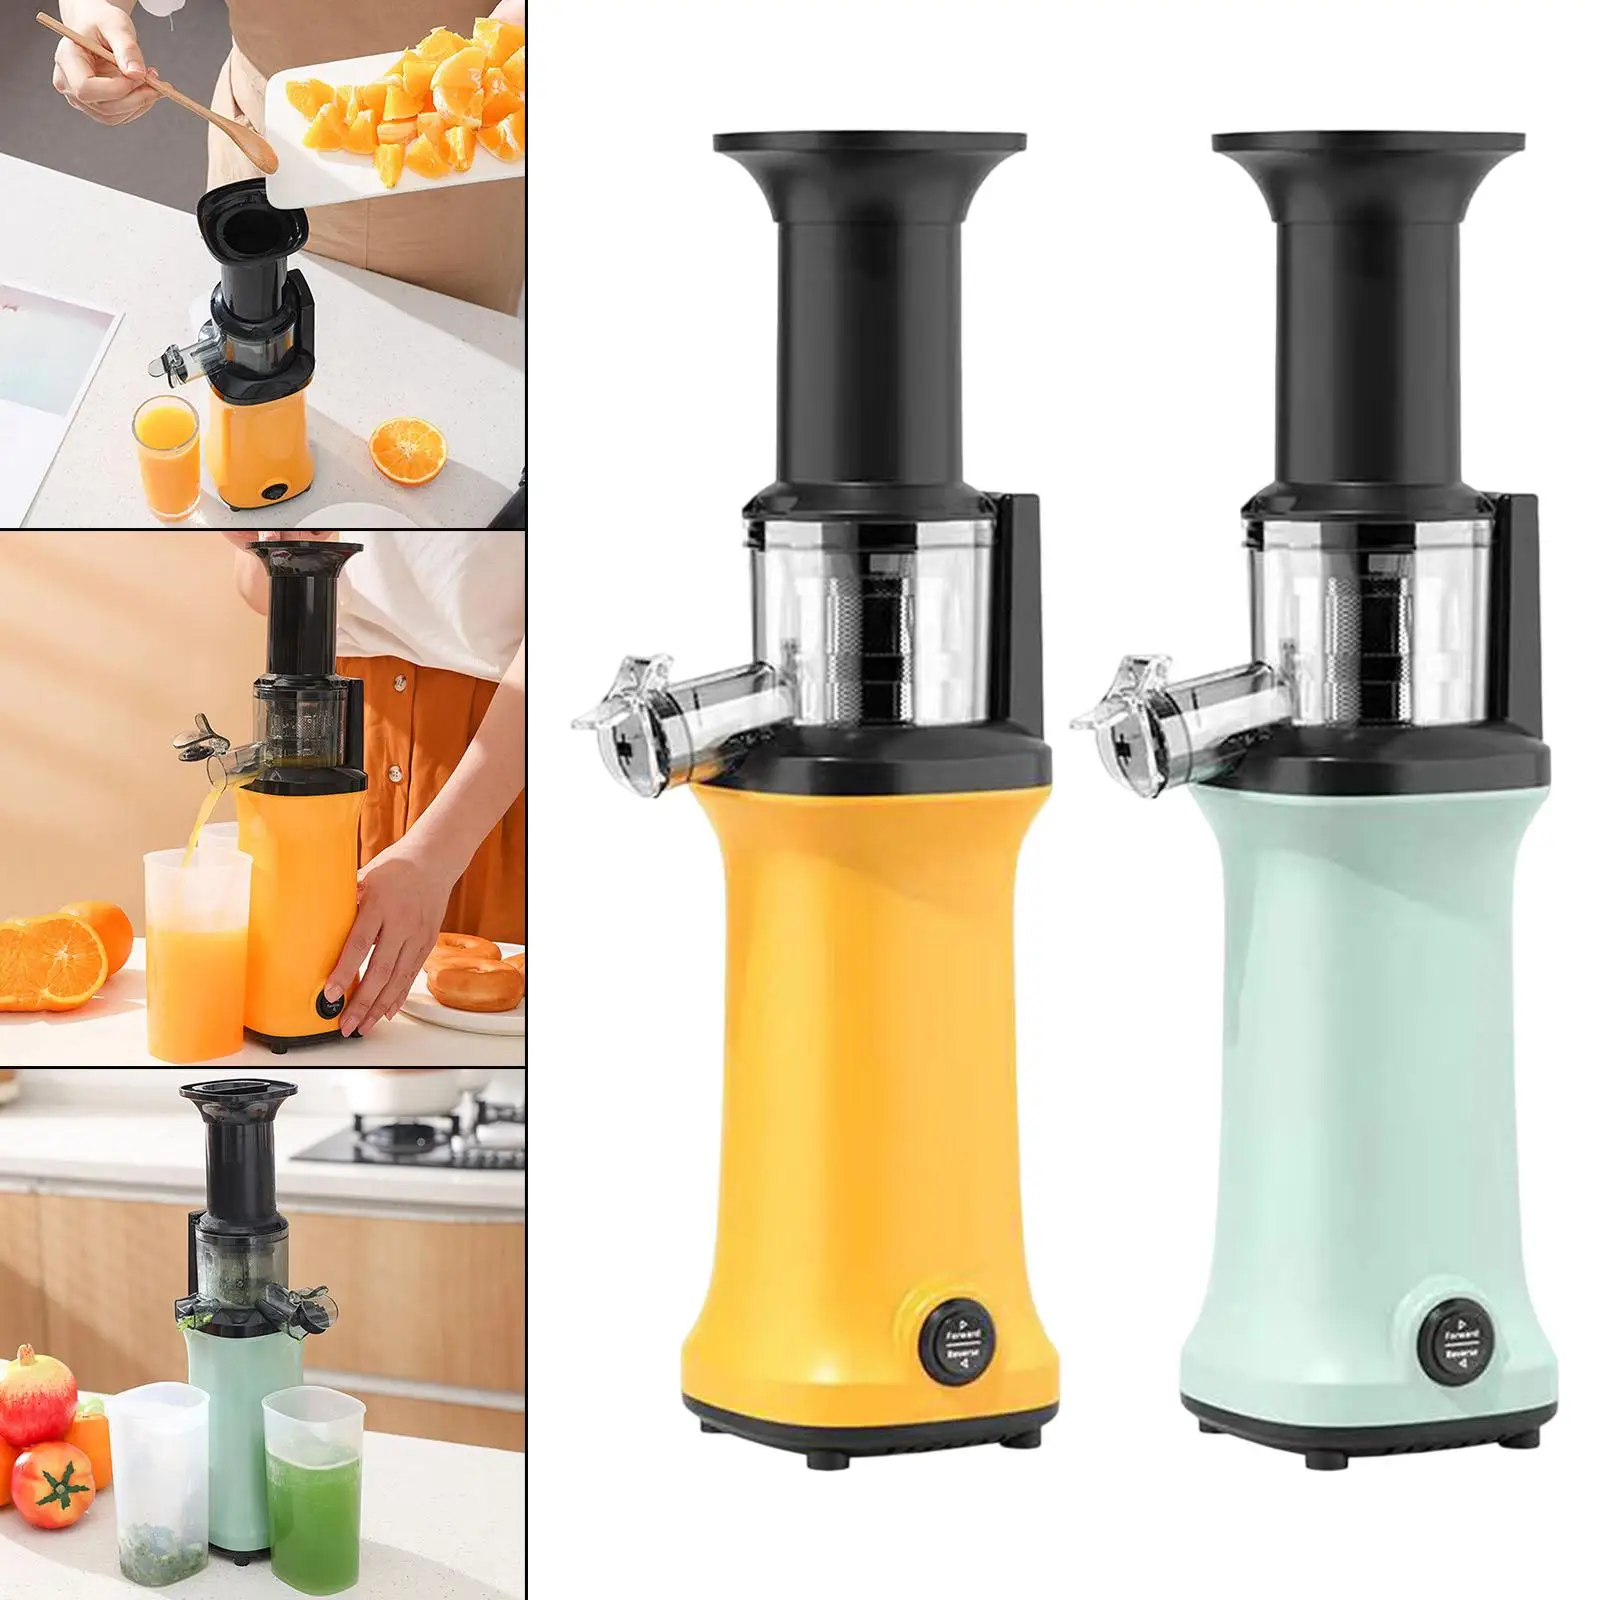 Portable Electric Juice Extractor Lemon Juicer Machine for Pineapple